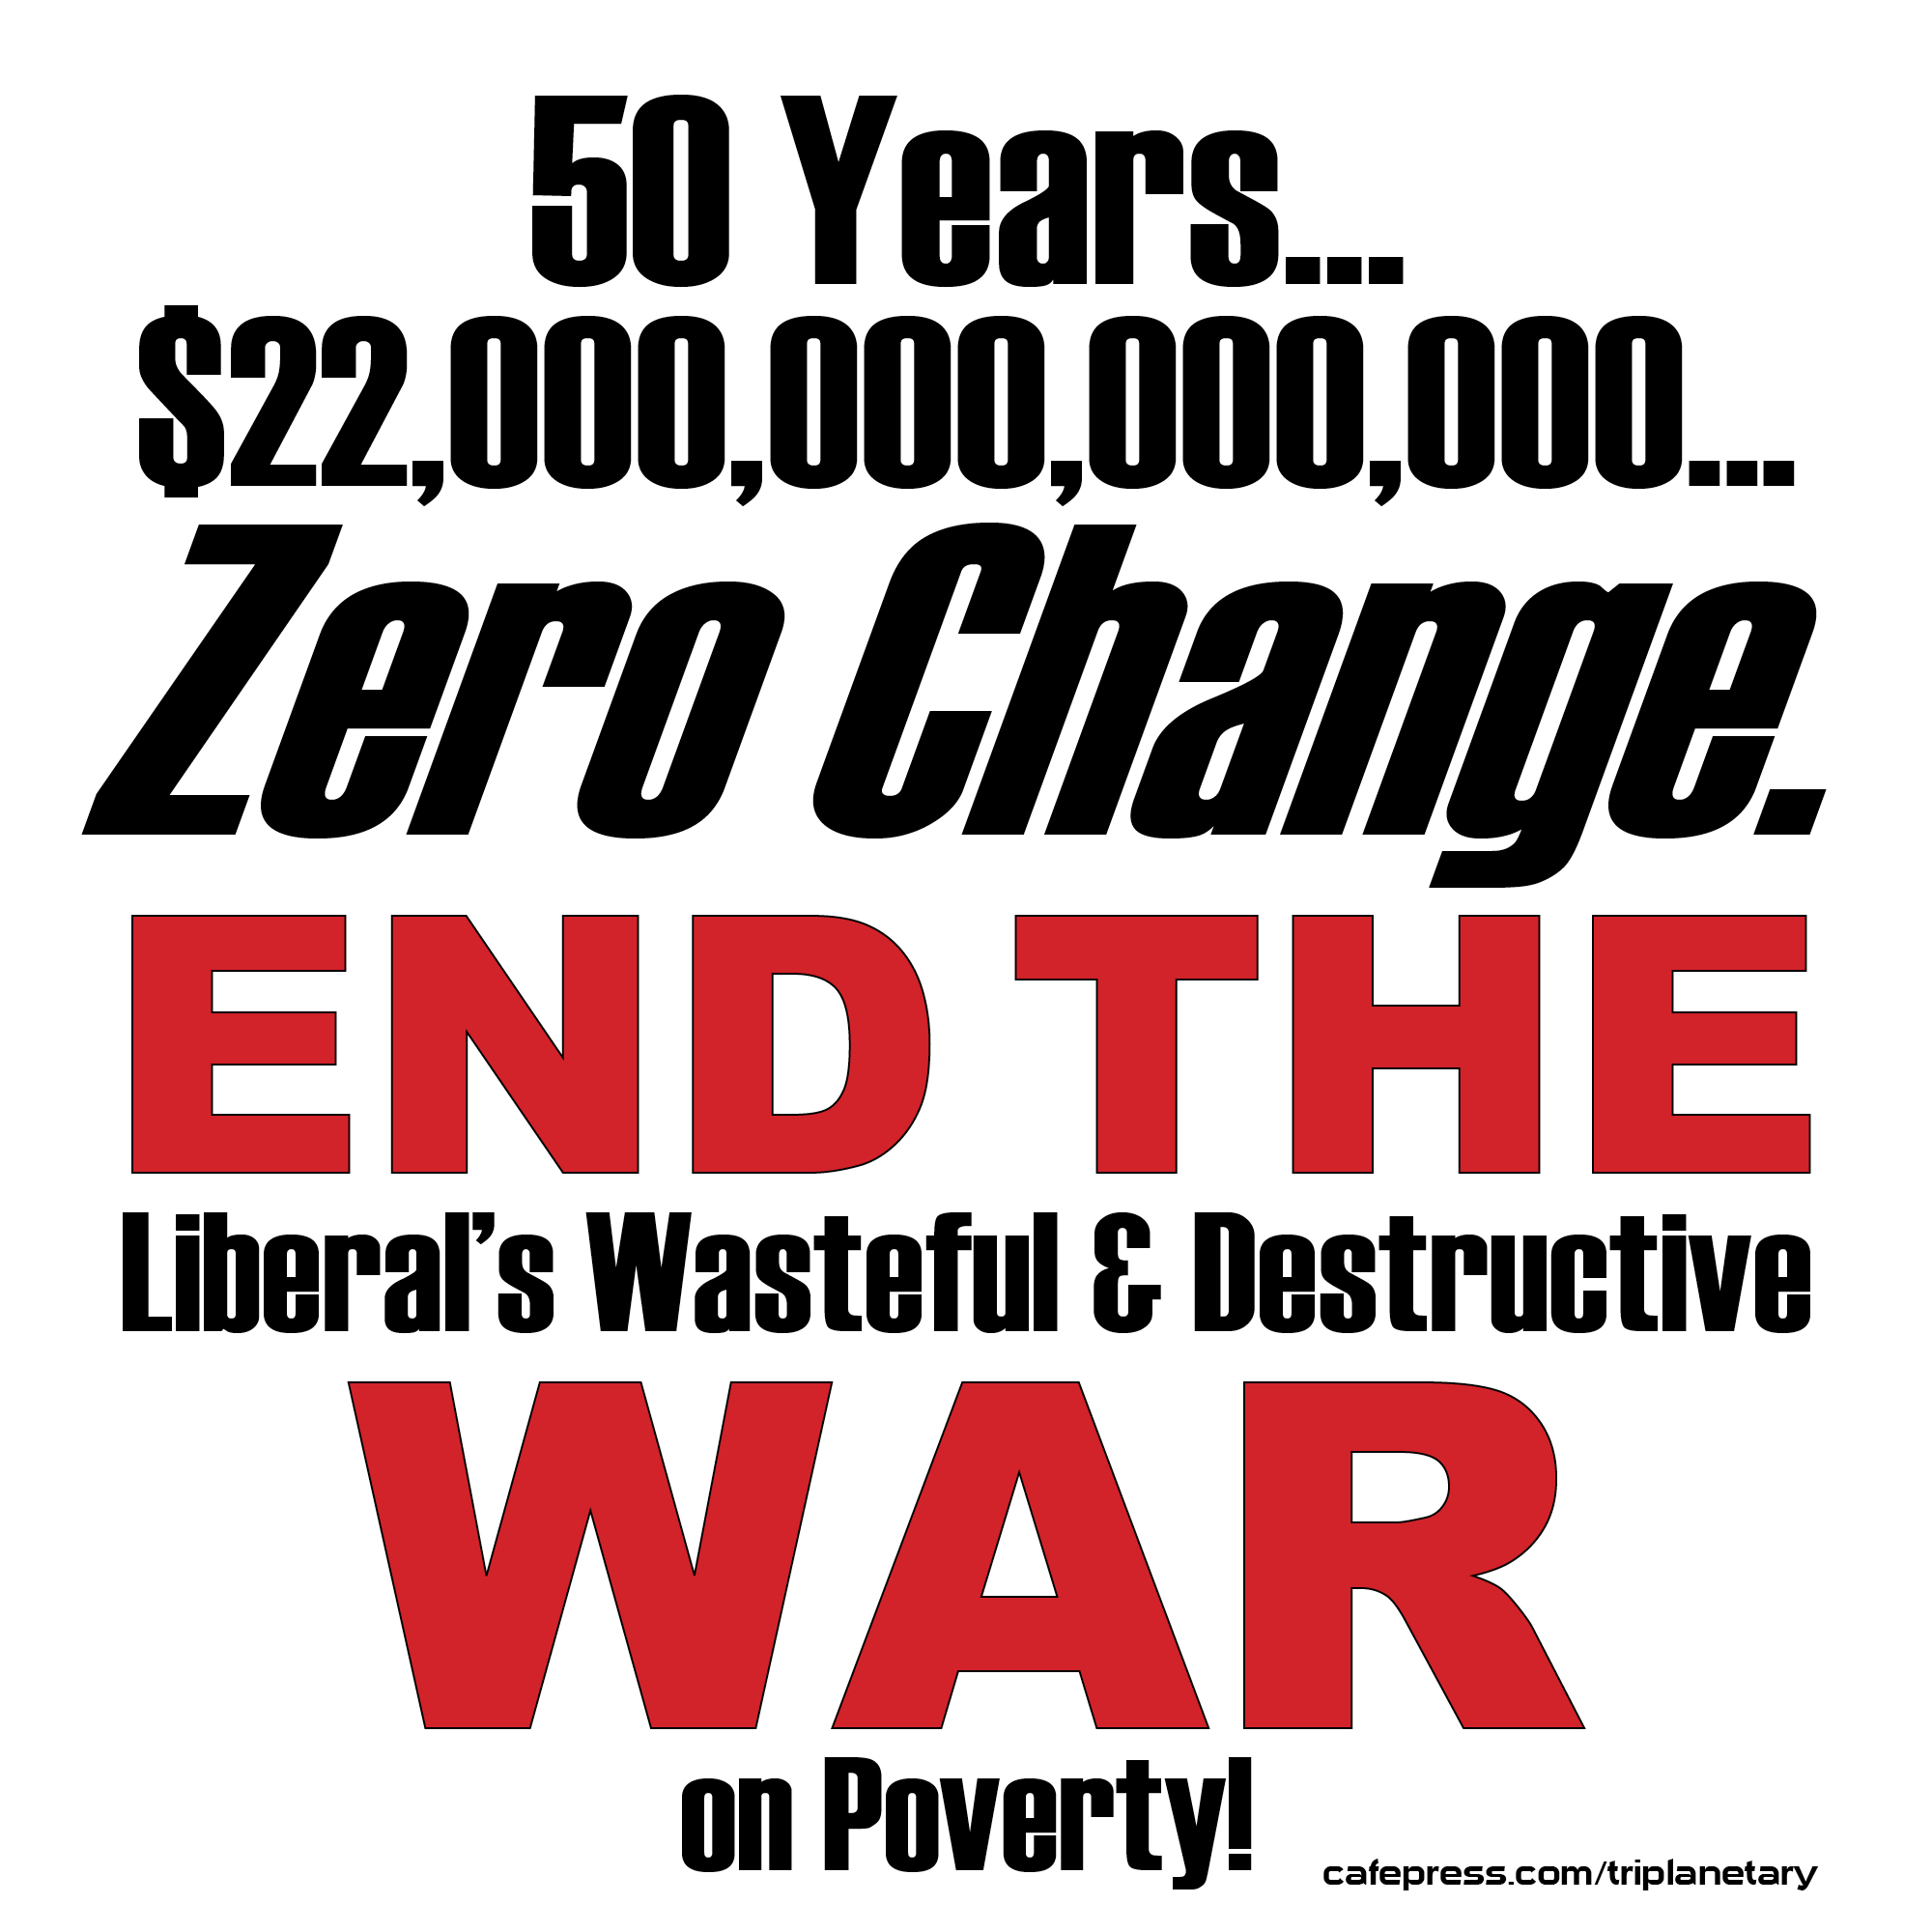 White and red image reading 'End the Liberal's War on Poverty'